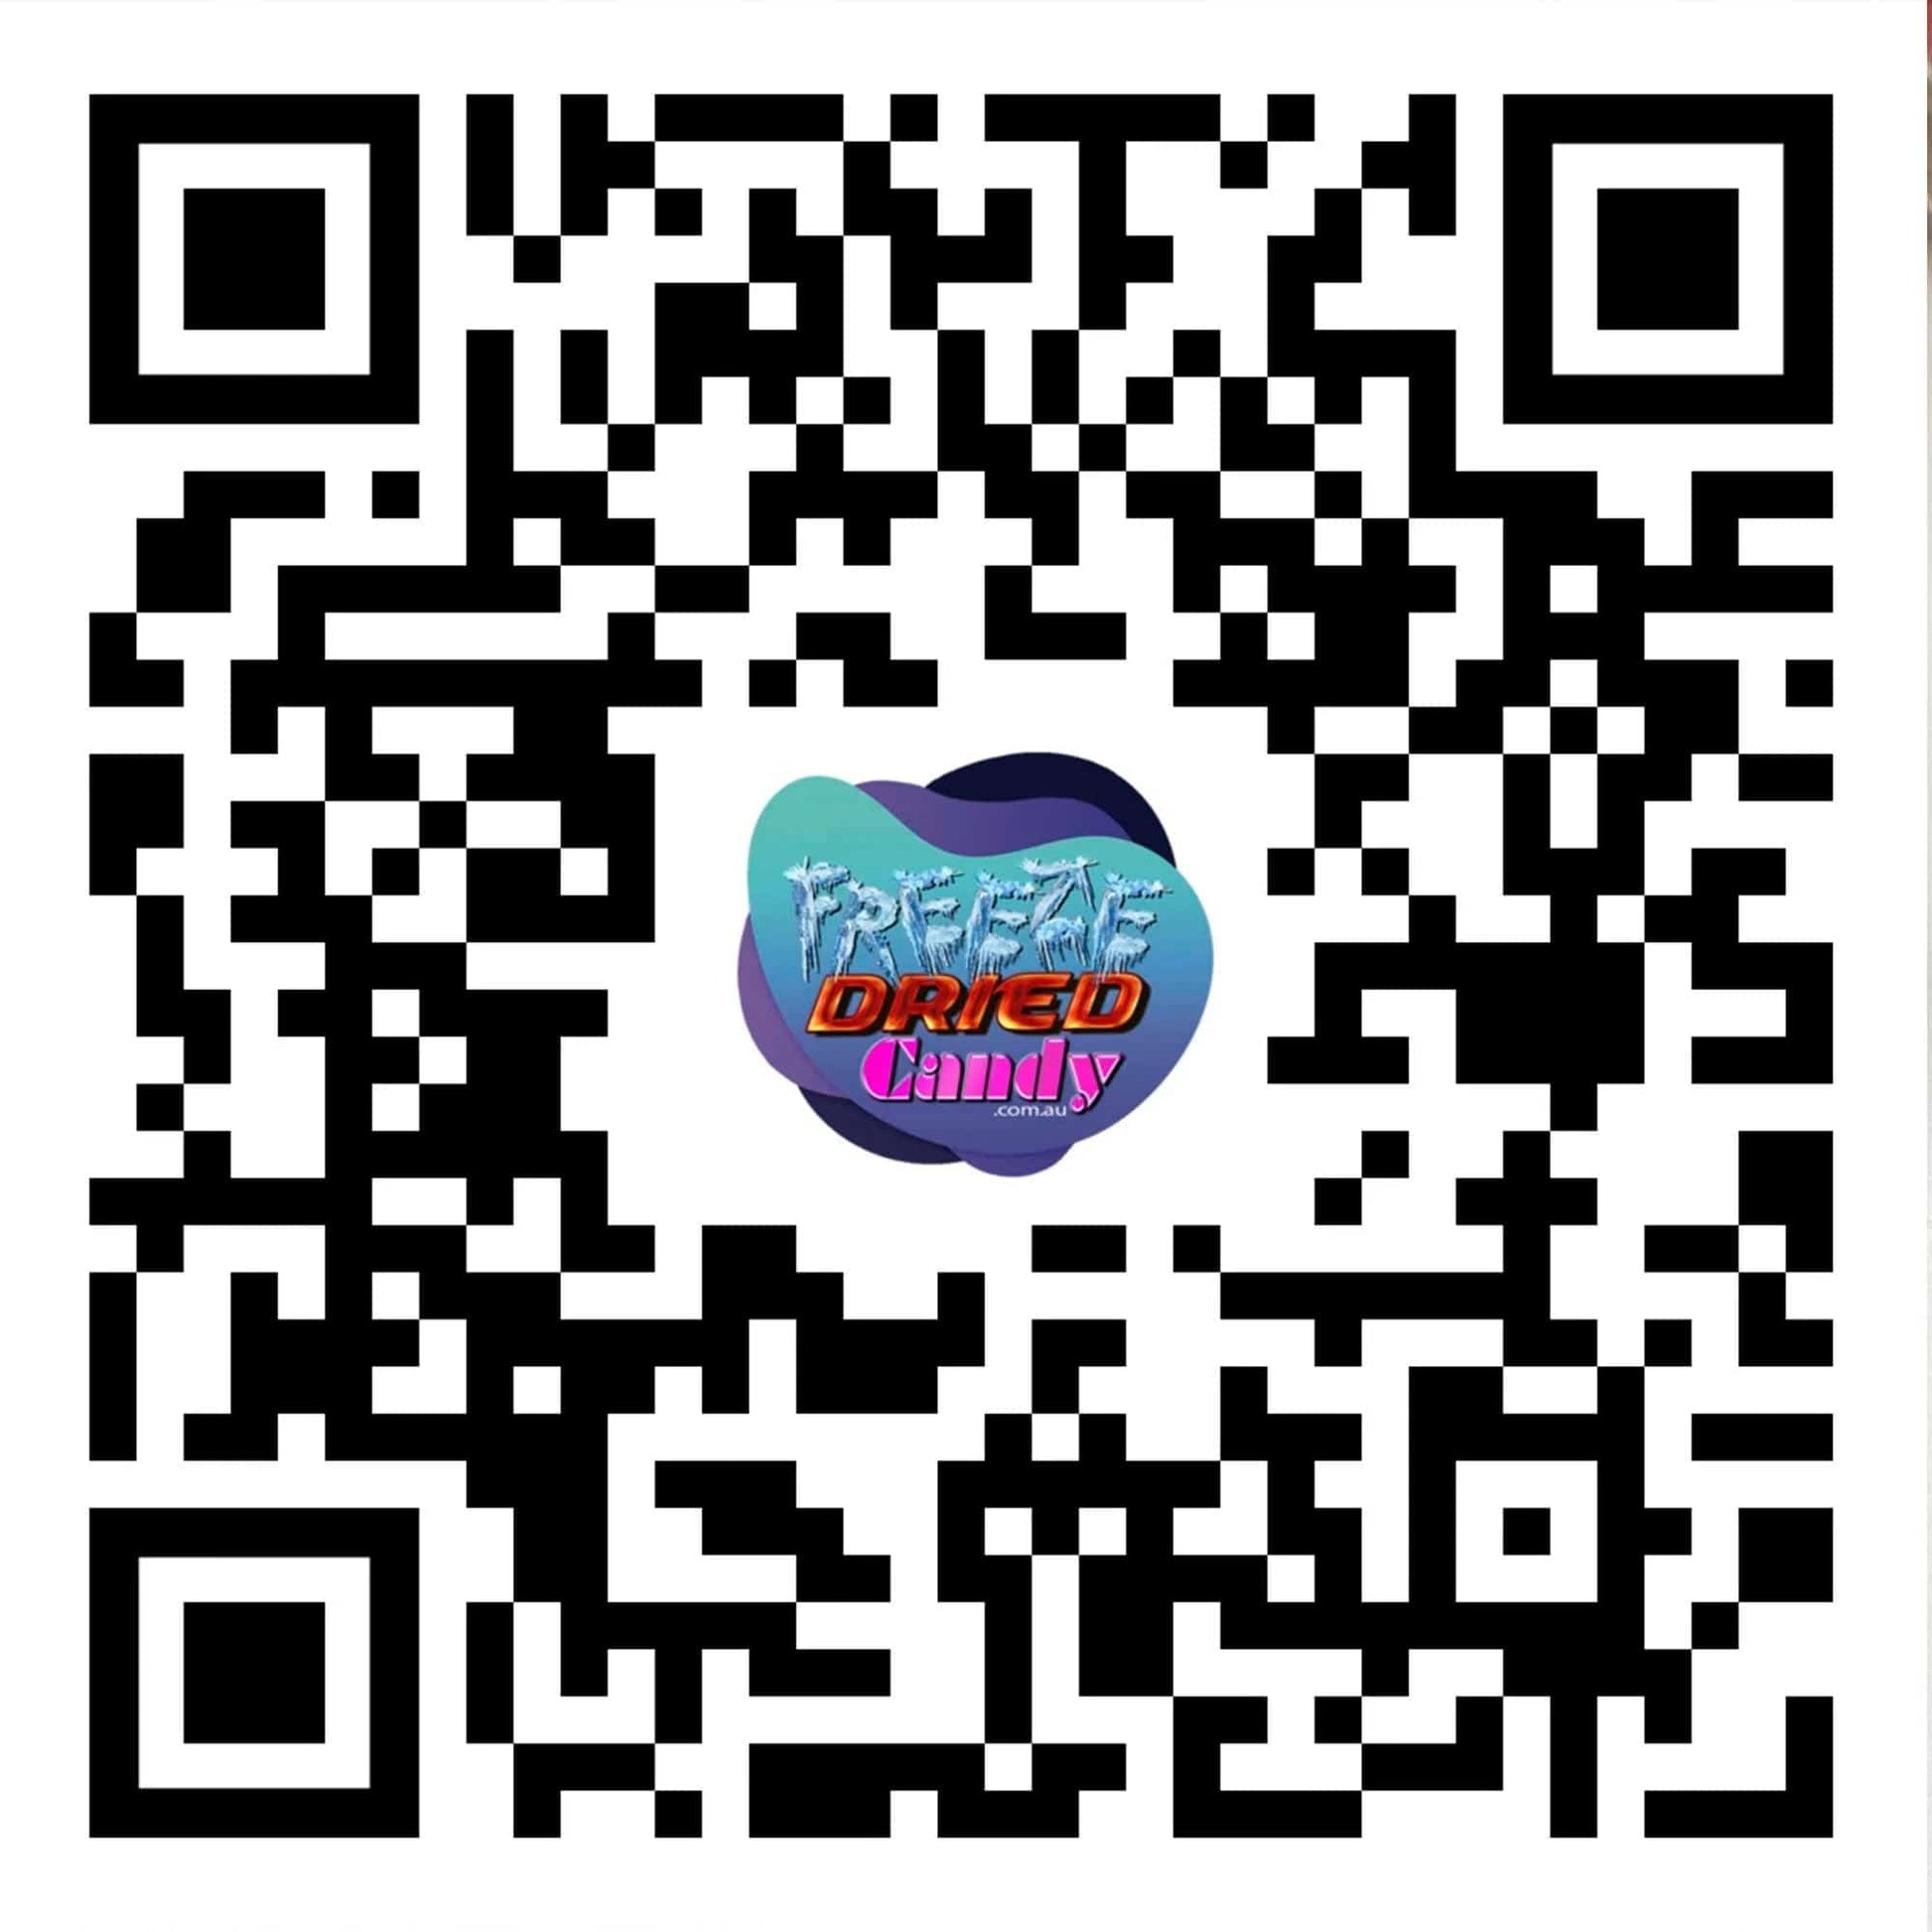 QR Code Find and Follow Freeze Dried Candy Lollies Sweets Treats Ice Cream on the internet 